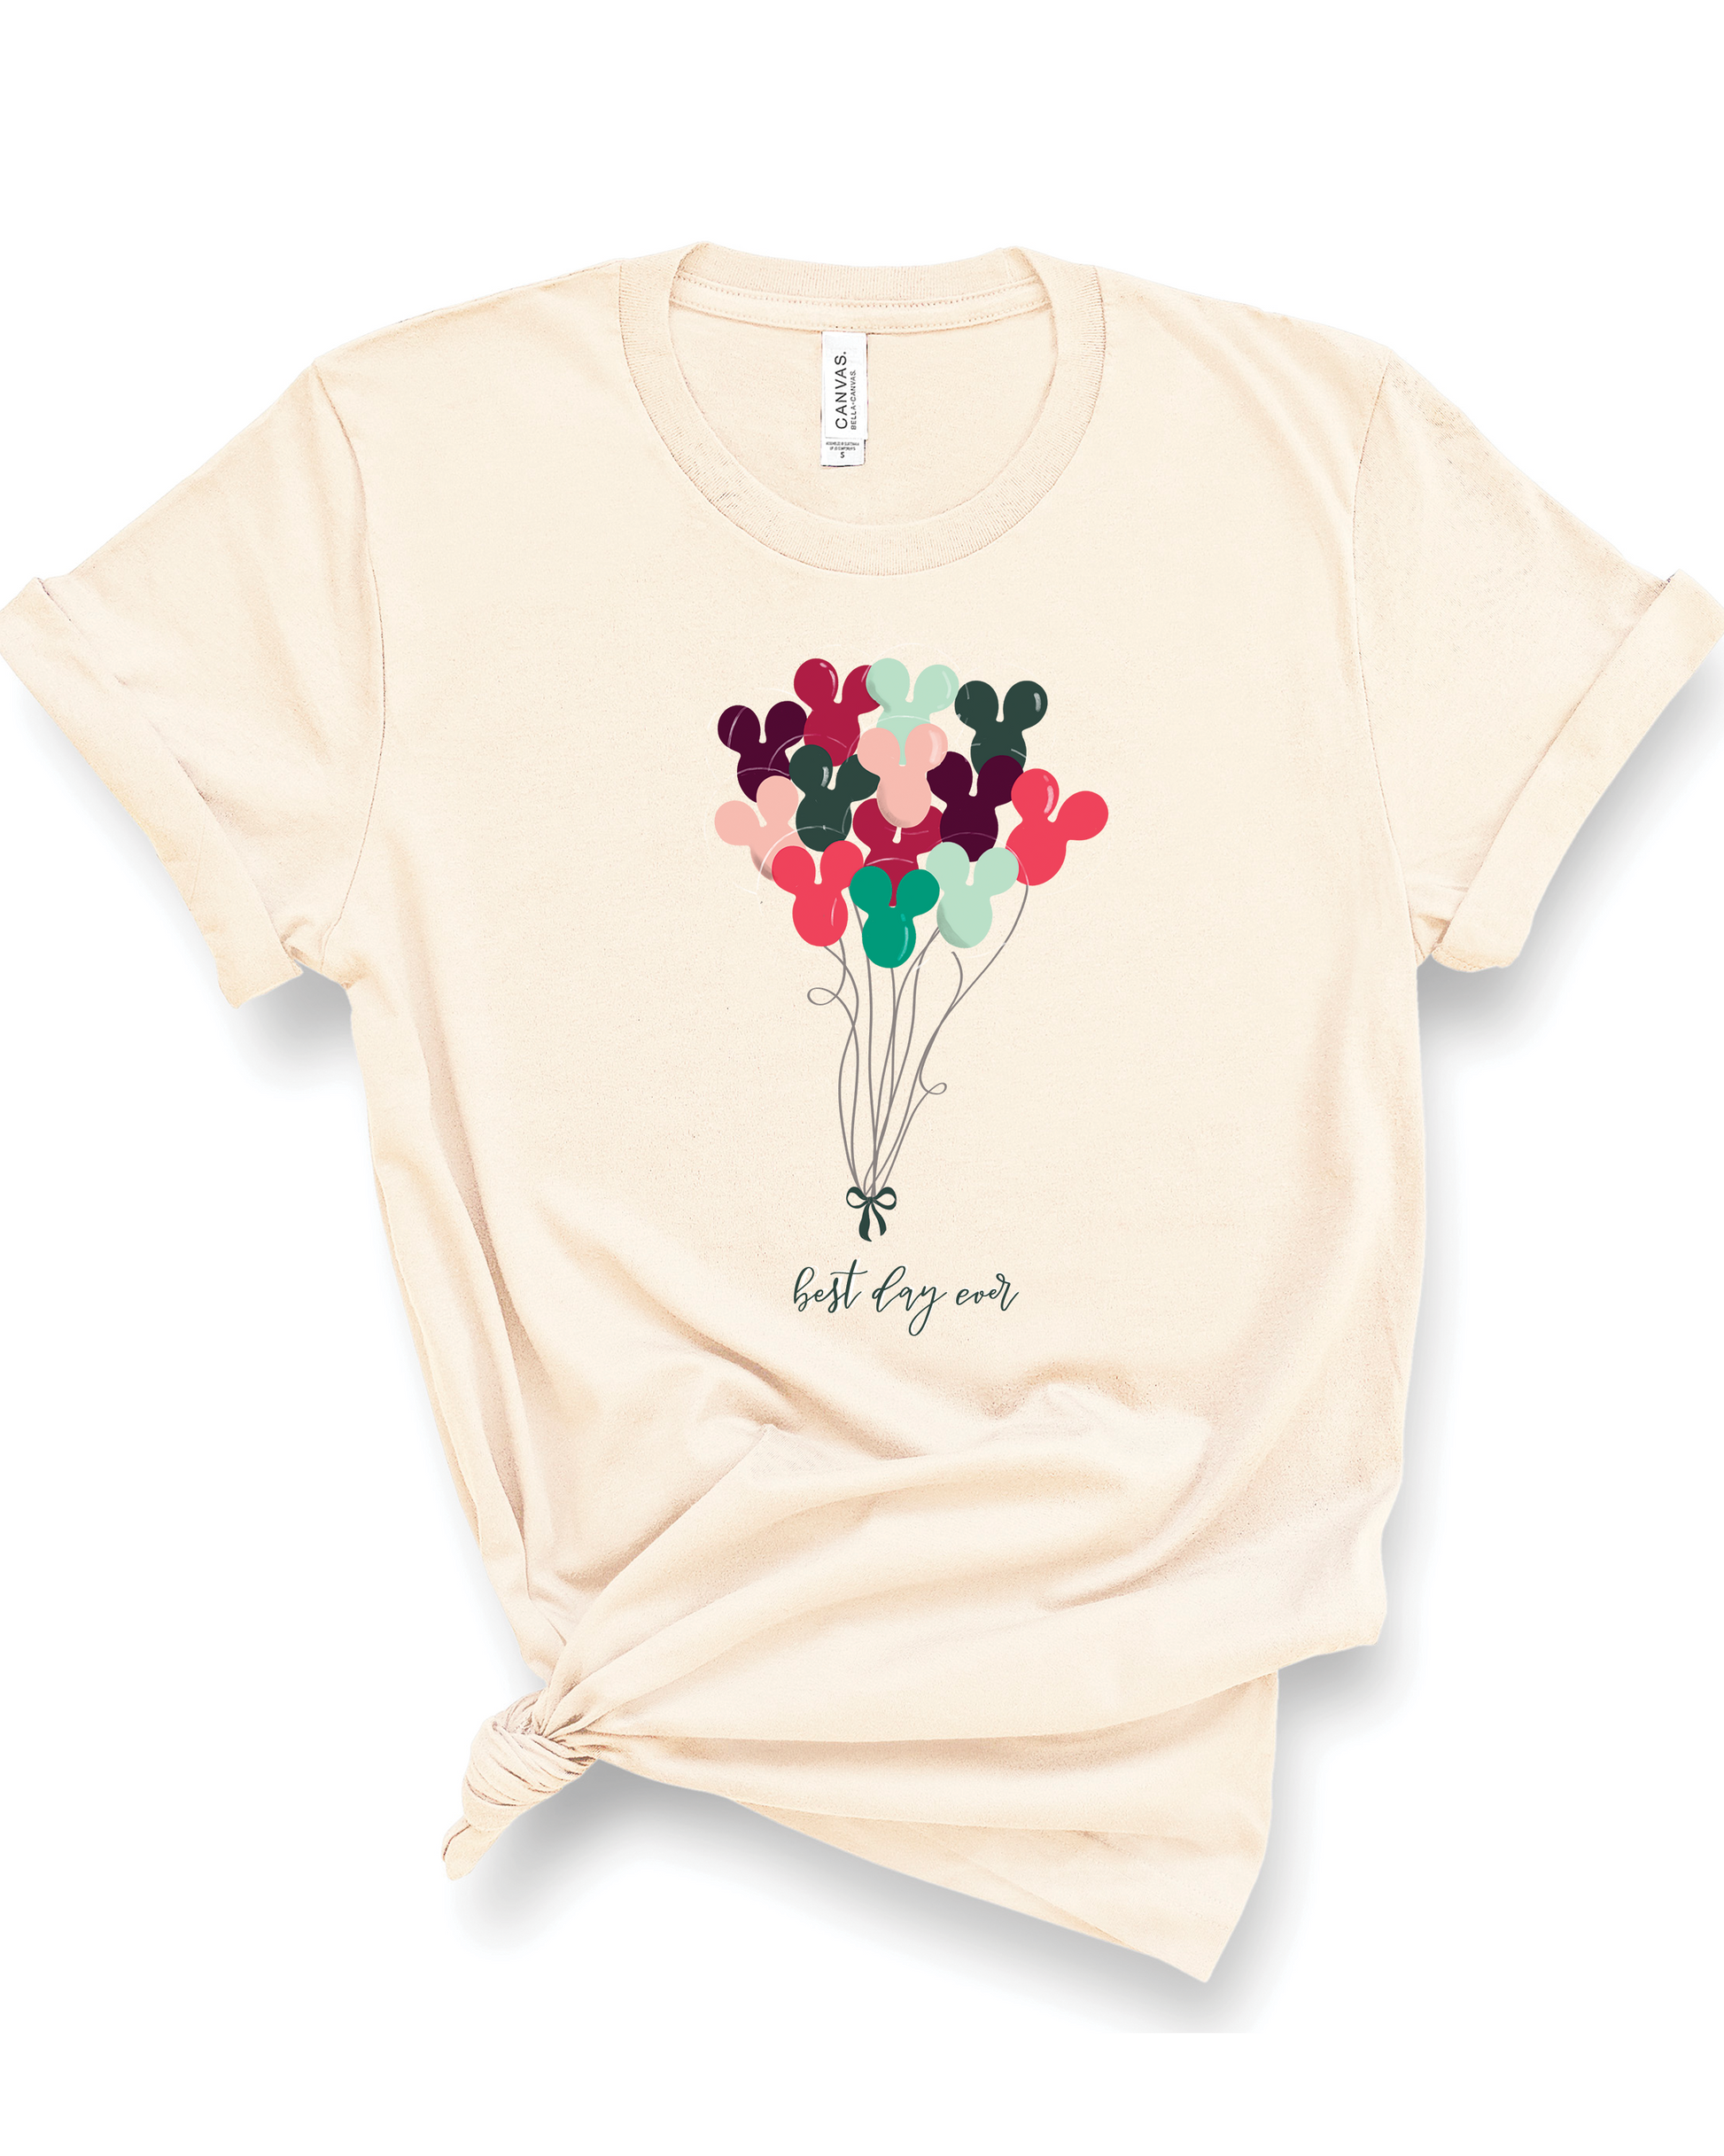 Best Day Ever Balloons | Kids Tee-Kids Tees-Sister Shirts-Sister Shirts, Cute & Custom Tees for Mama & Littles in Trussville, Alabama.